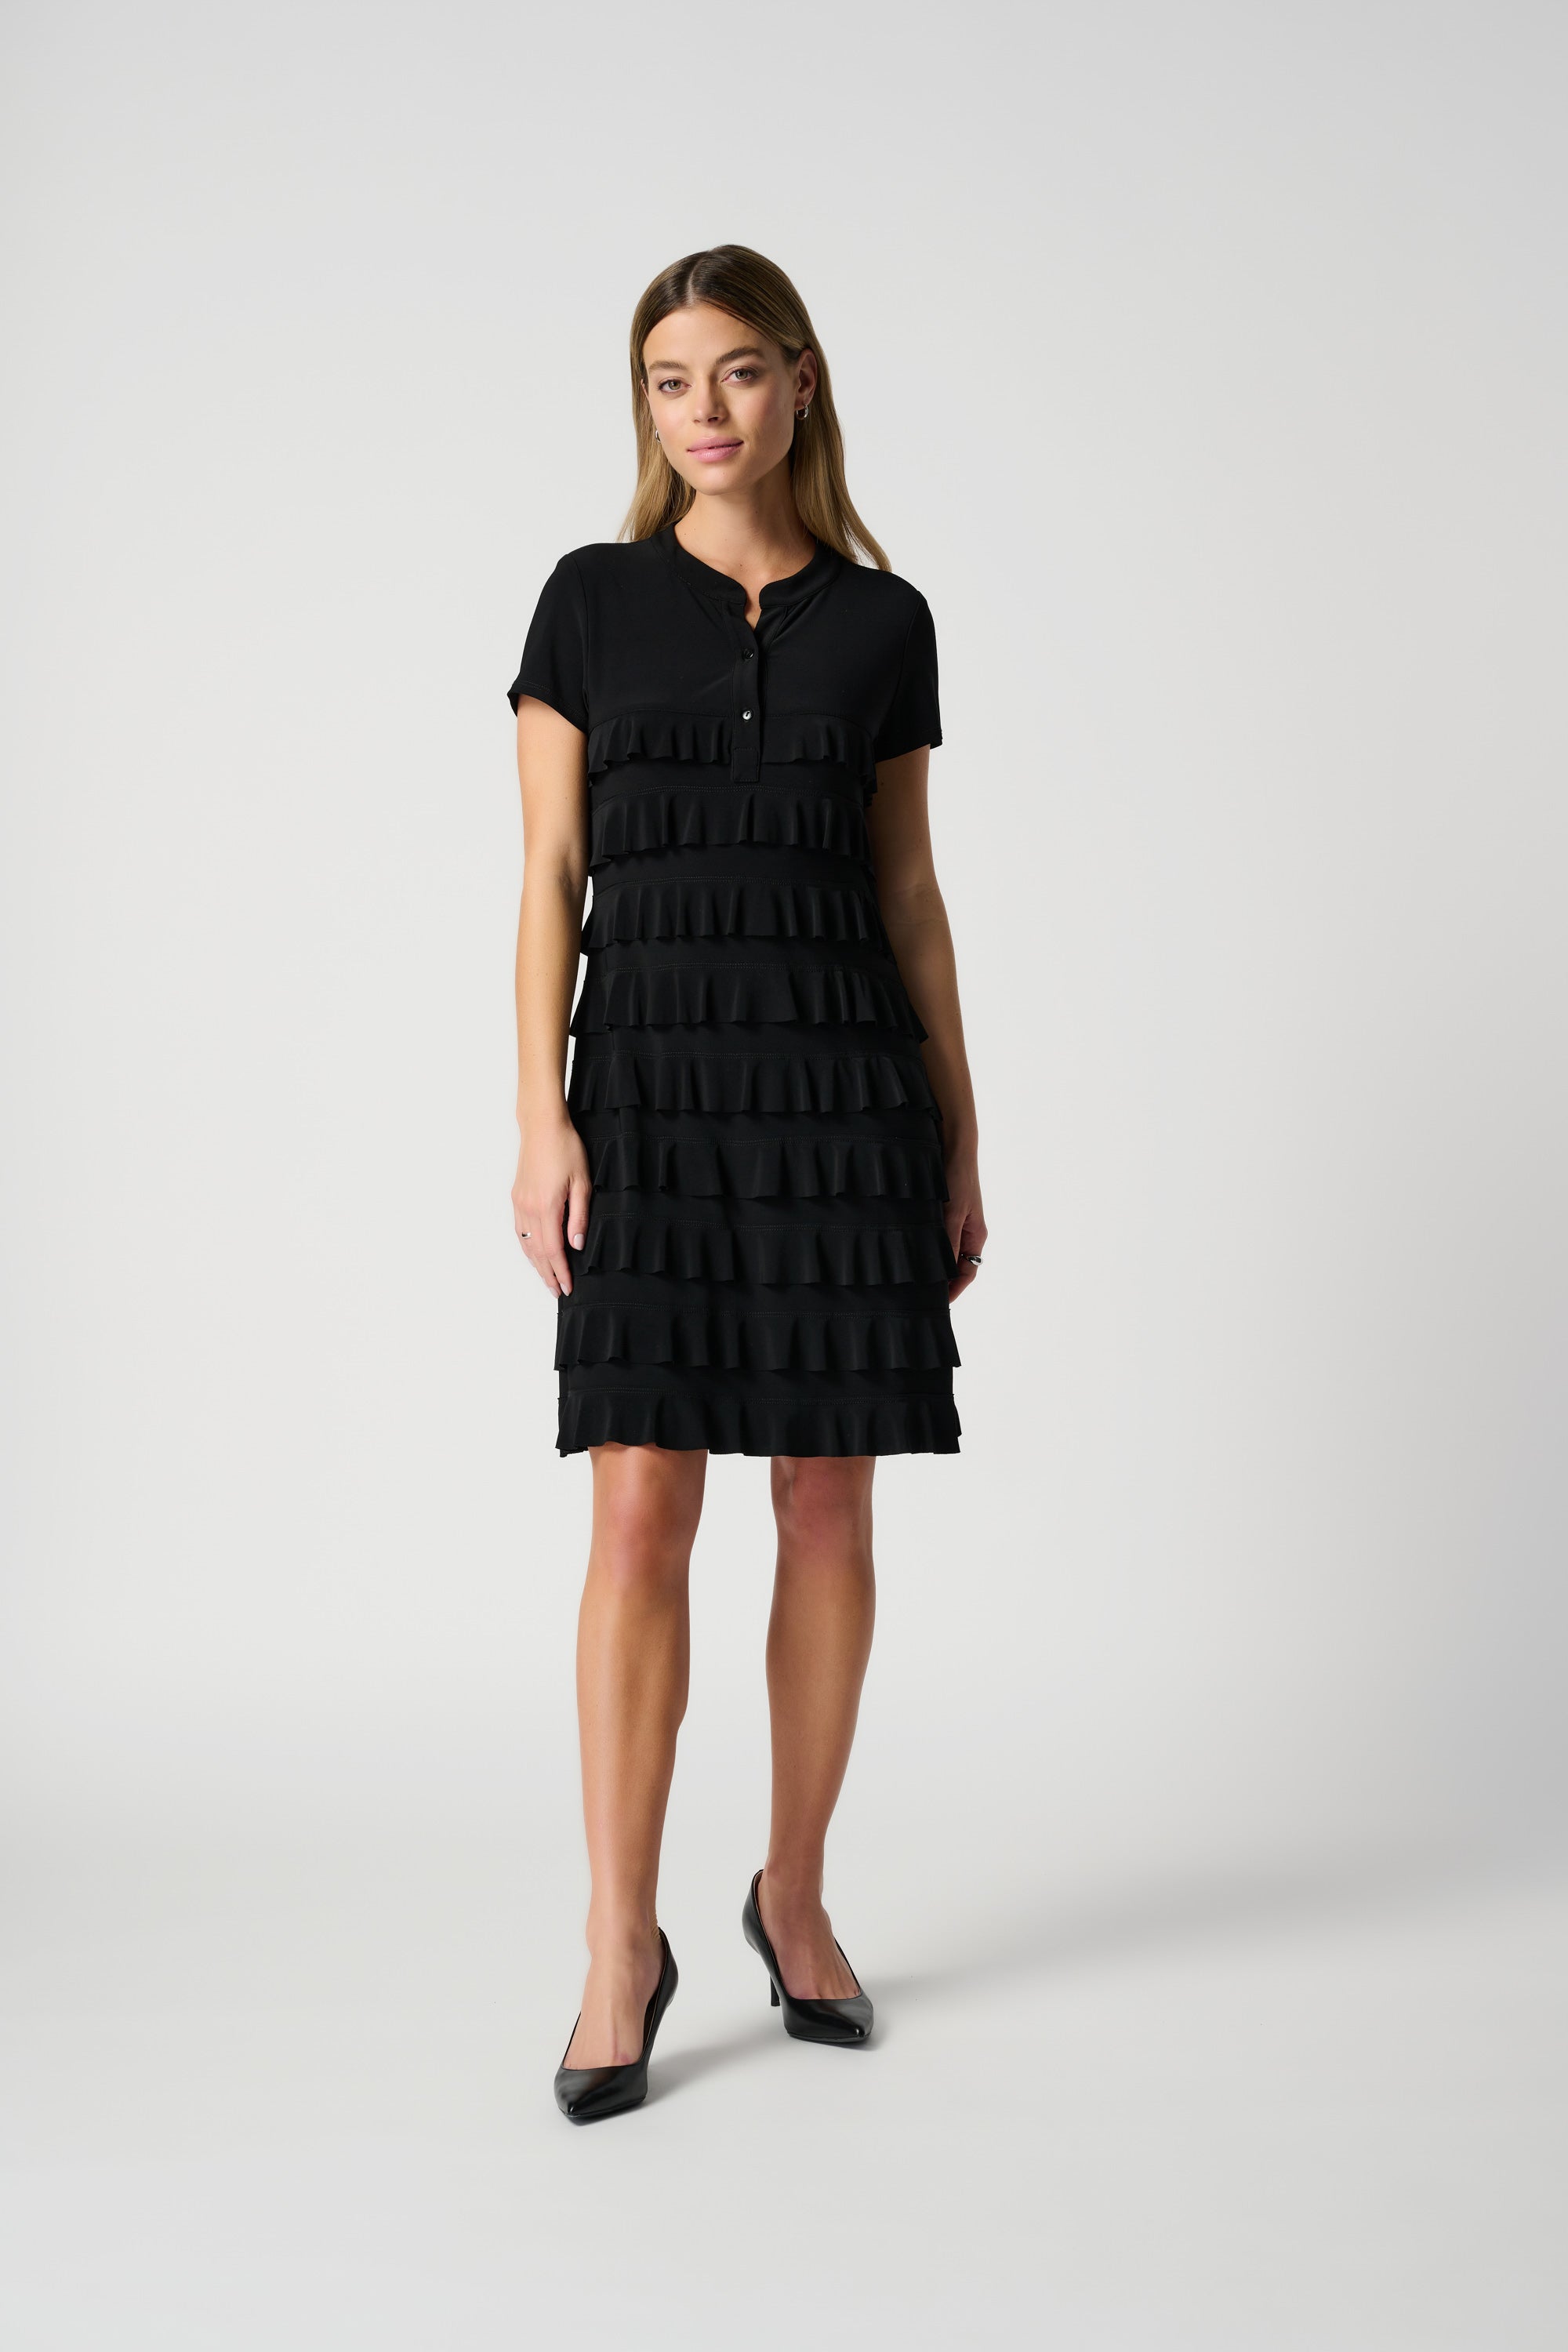 Joseph Ribkoff (211350NOS) Women's Short Sleeve Knee Length Dress With Stand Collar and Ruffle Detailing in Black